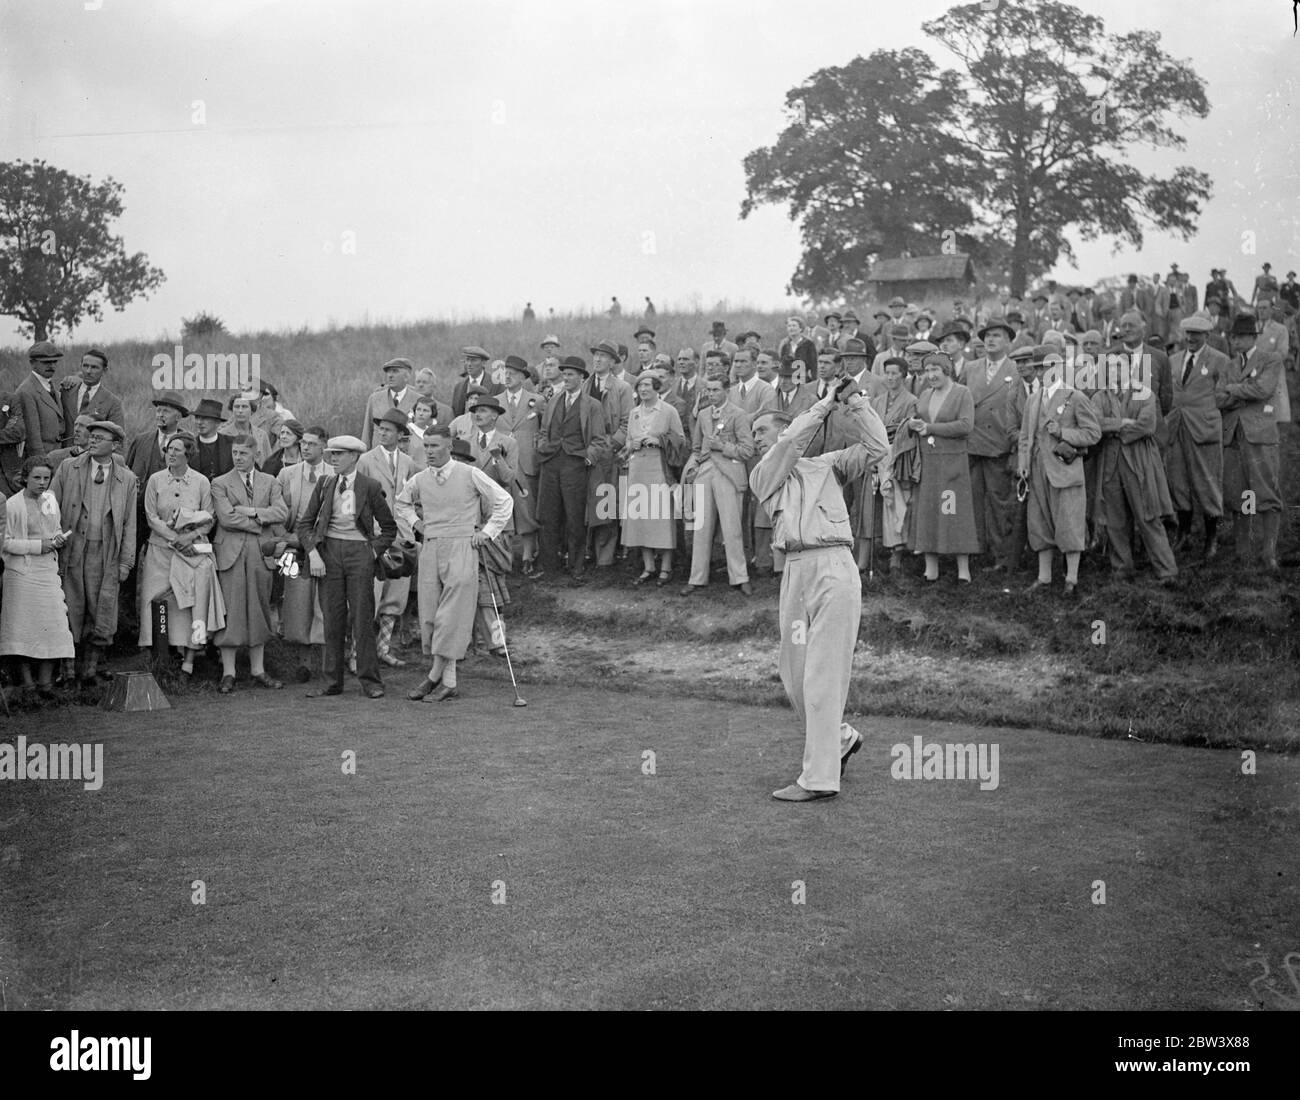 American competitor in big professional golf tournament . Leading golfers are competing in the professional matchplay championships worth Â£1250 at Oxhey , Herts . Photo shows , A H Pagden of Sundridge Park, last year's winner , drawing from the third tee watched by his opponents K Williams ( Dinas Powis ) . 15 September 1936 Stock Photo